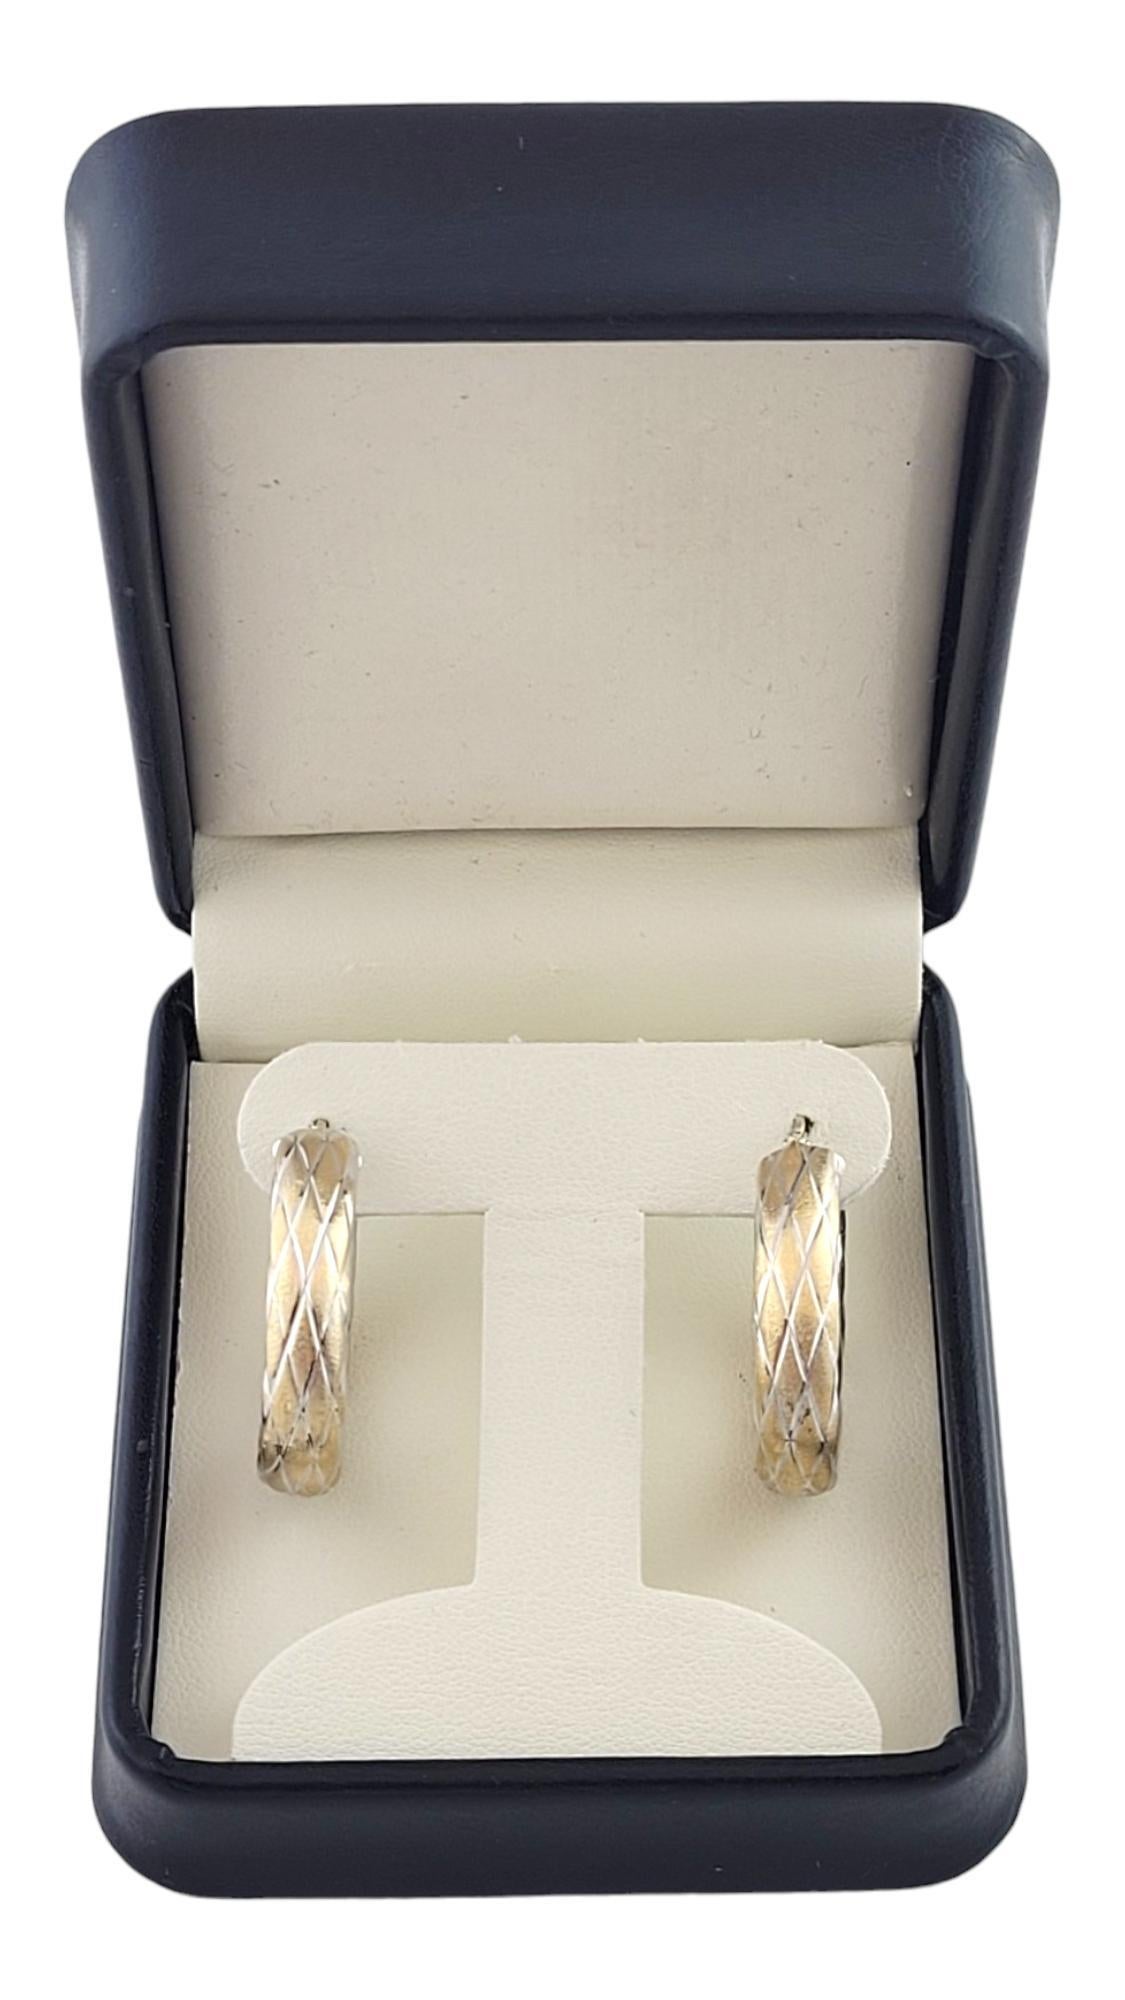 14K White and Yellow Gold Criss Cross Pattern Hoop Earrings #16190 For Sale 2